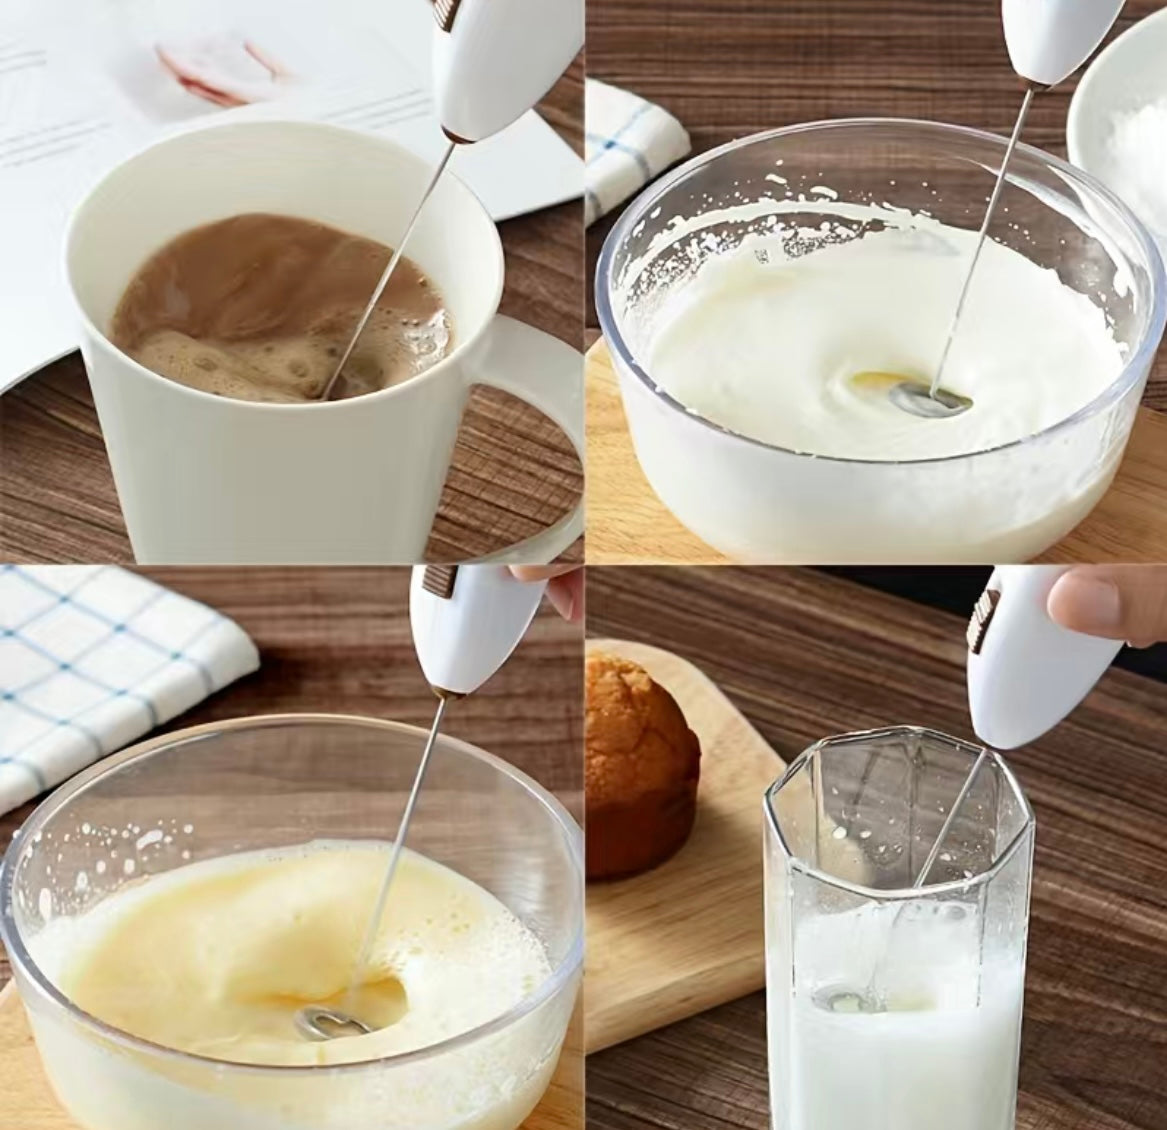 Milk Frother Handheld Wand Coffee Mixer - JayBlueHomes